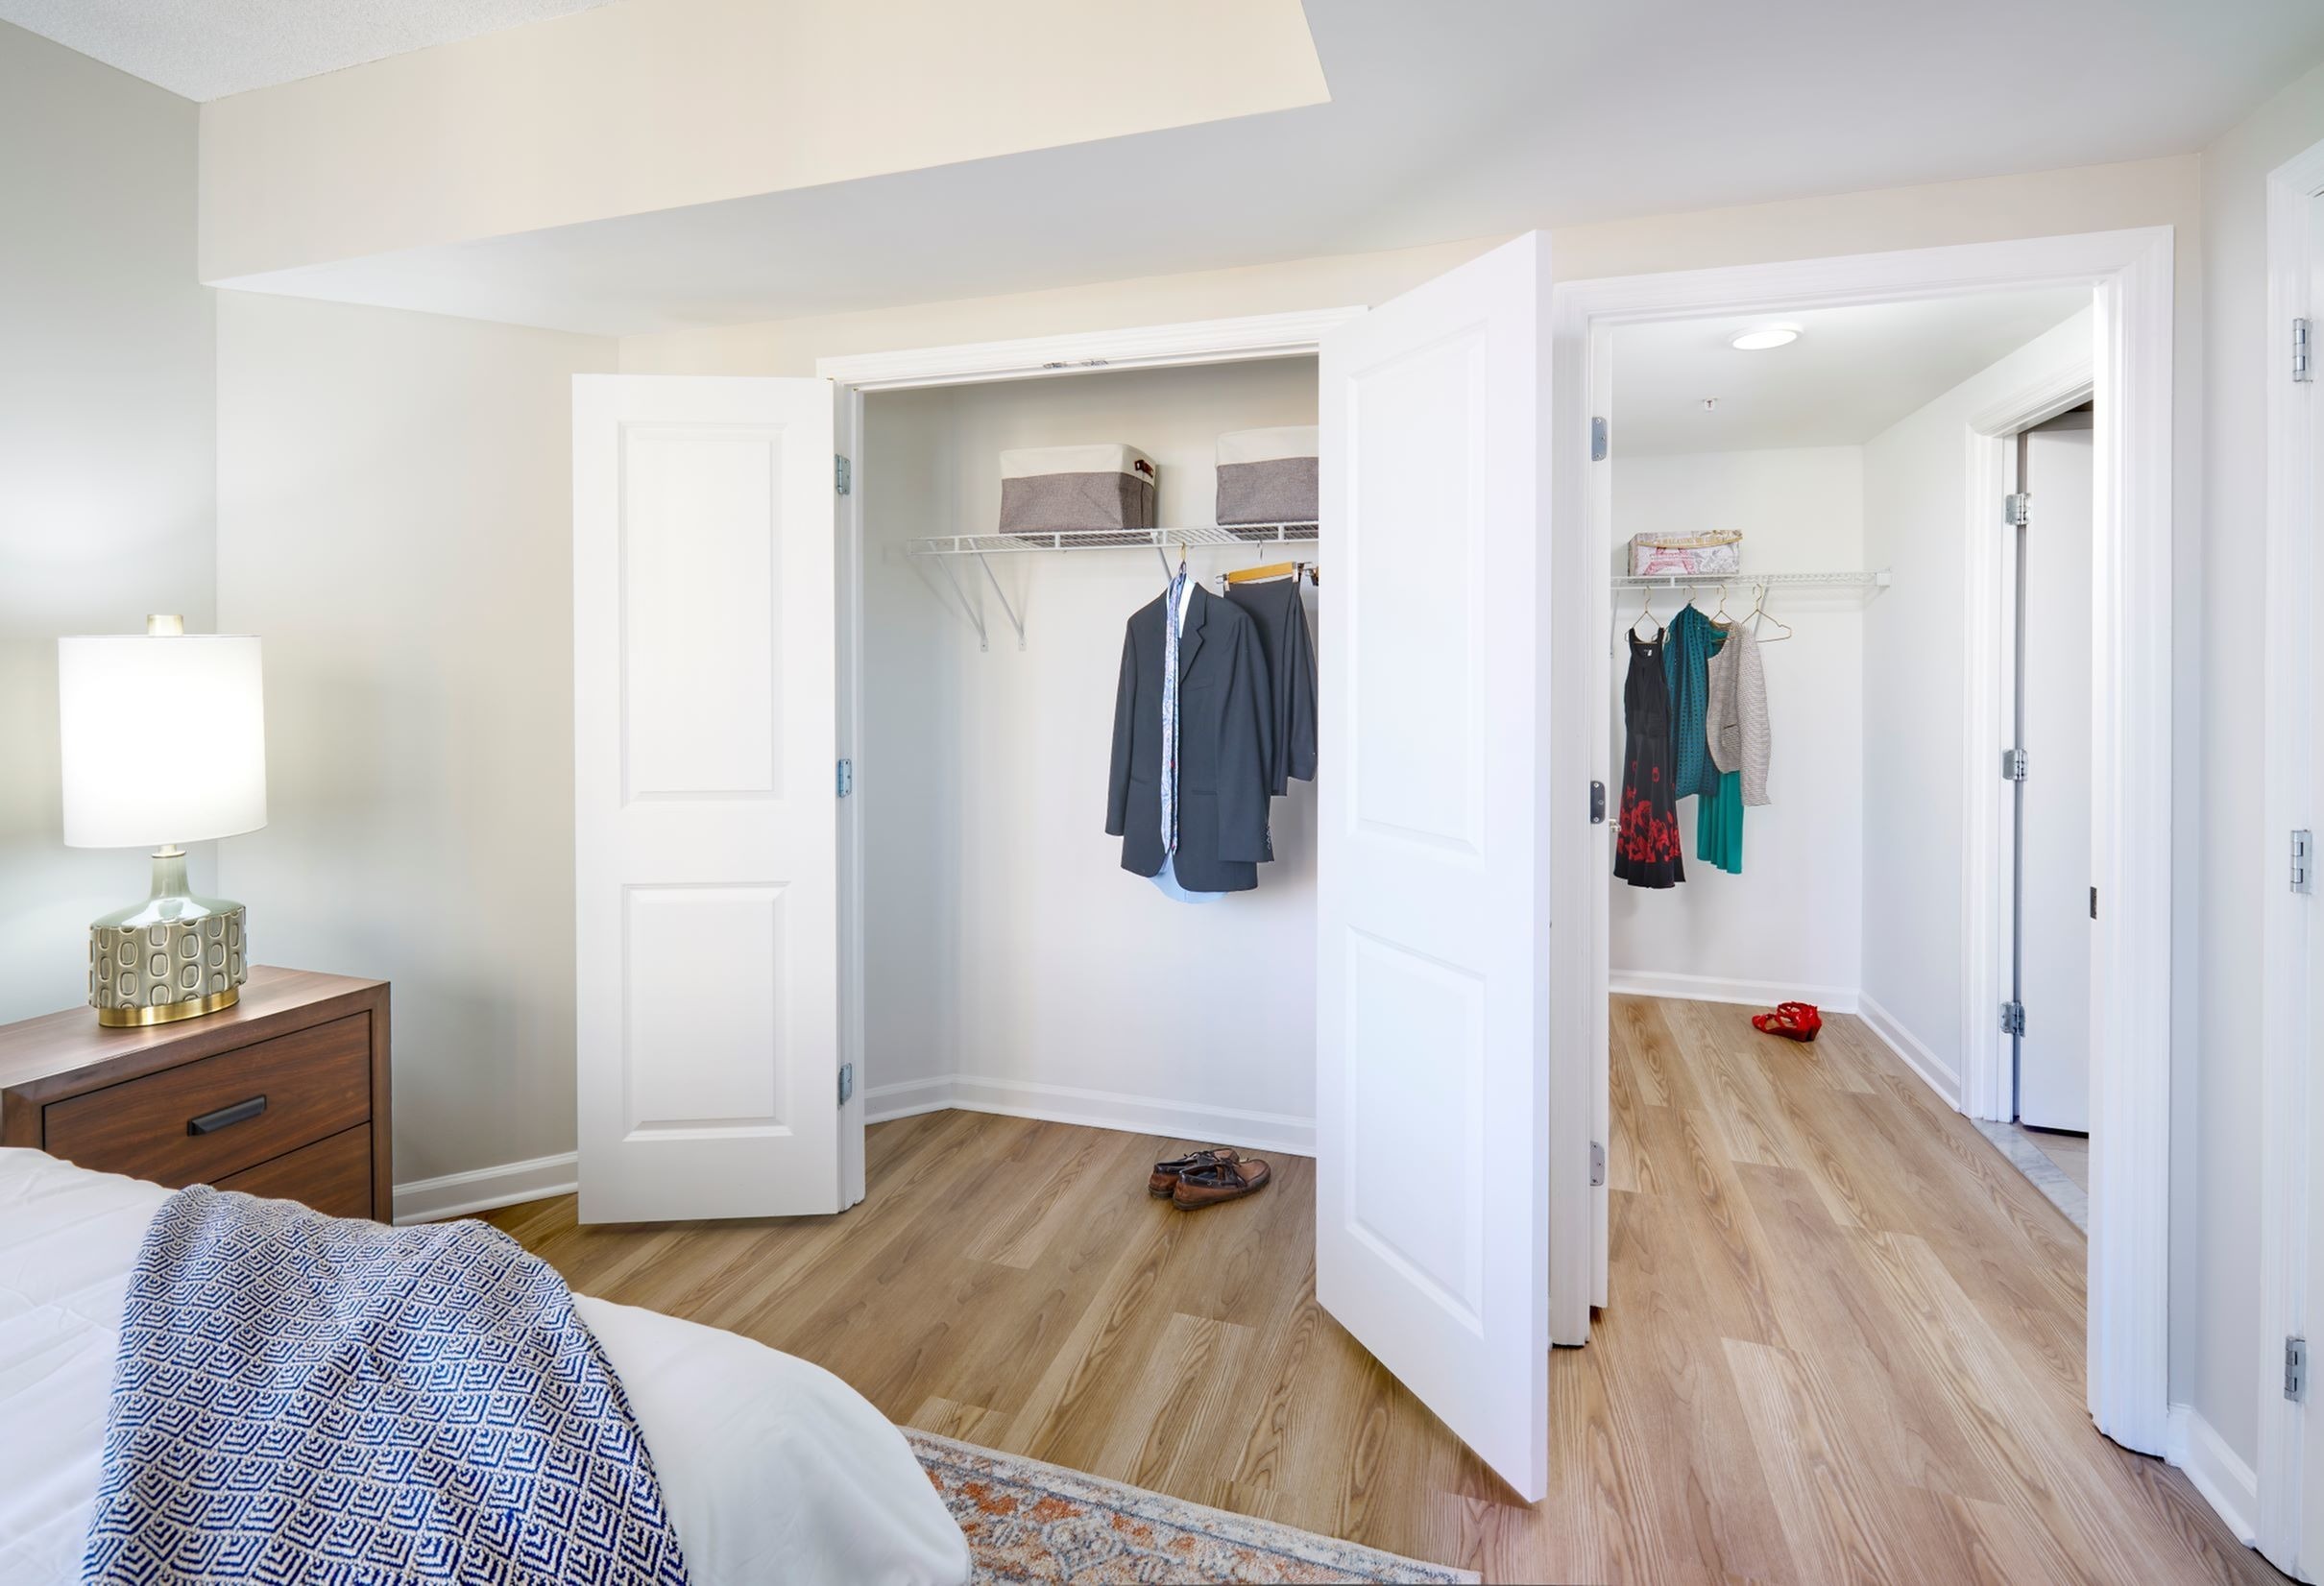 Bedroom & Closet in a Newly Renovated Apartment